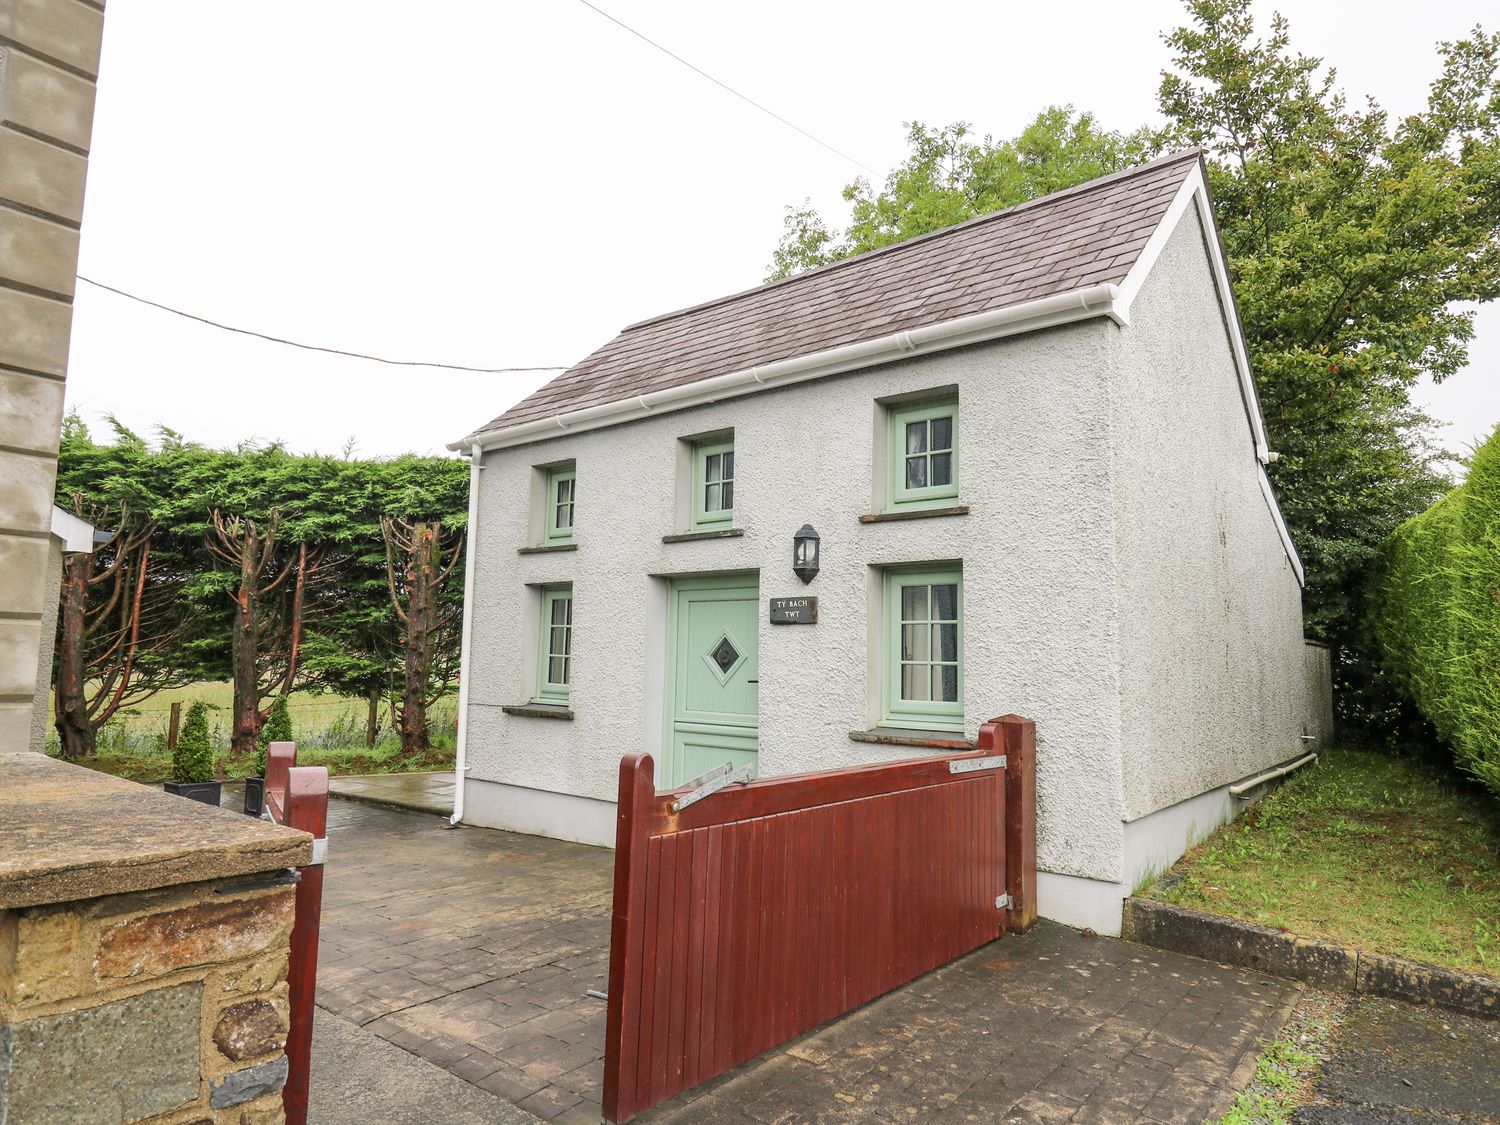 Ty Bach Twt - Mid Wales - 1125360 - photo 1